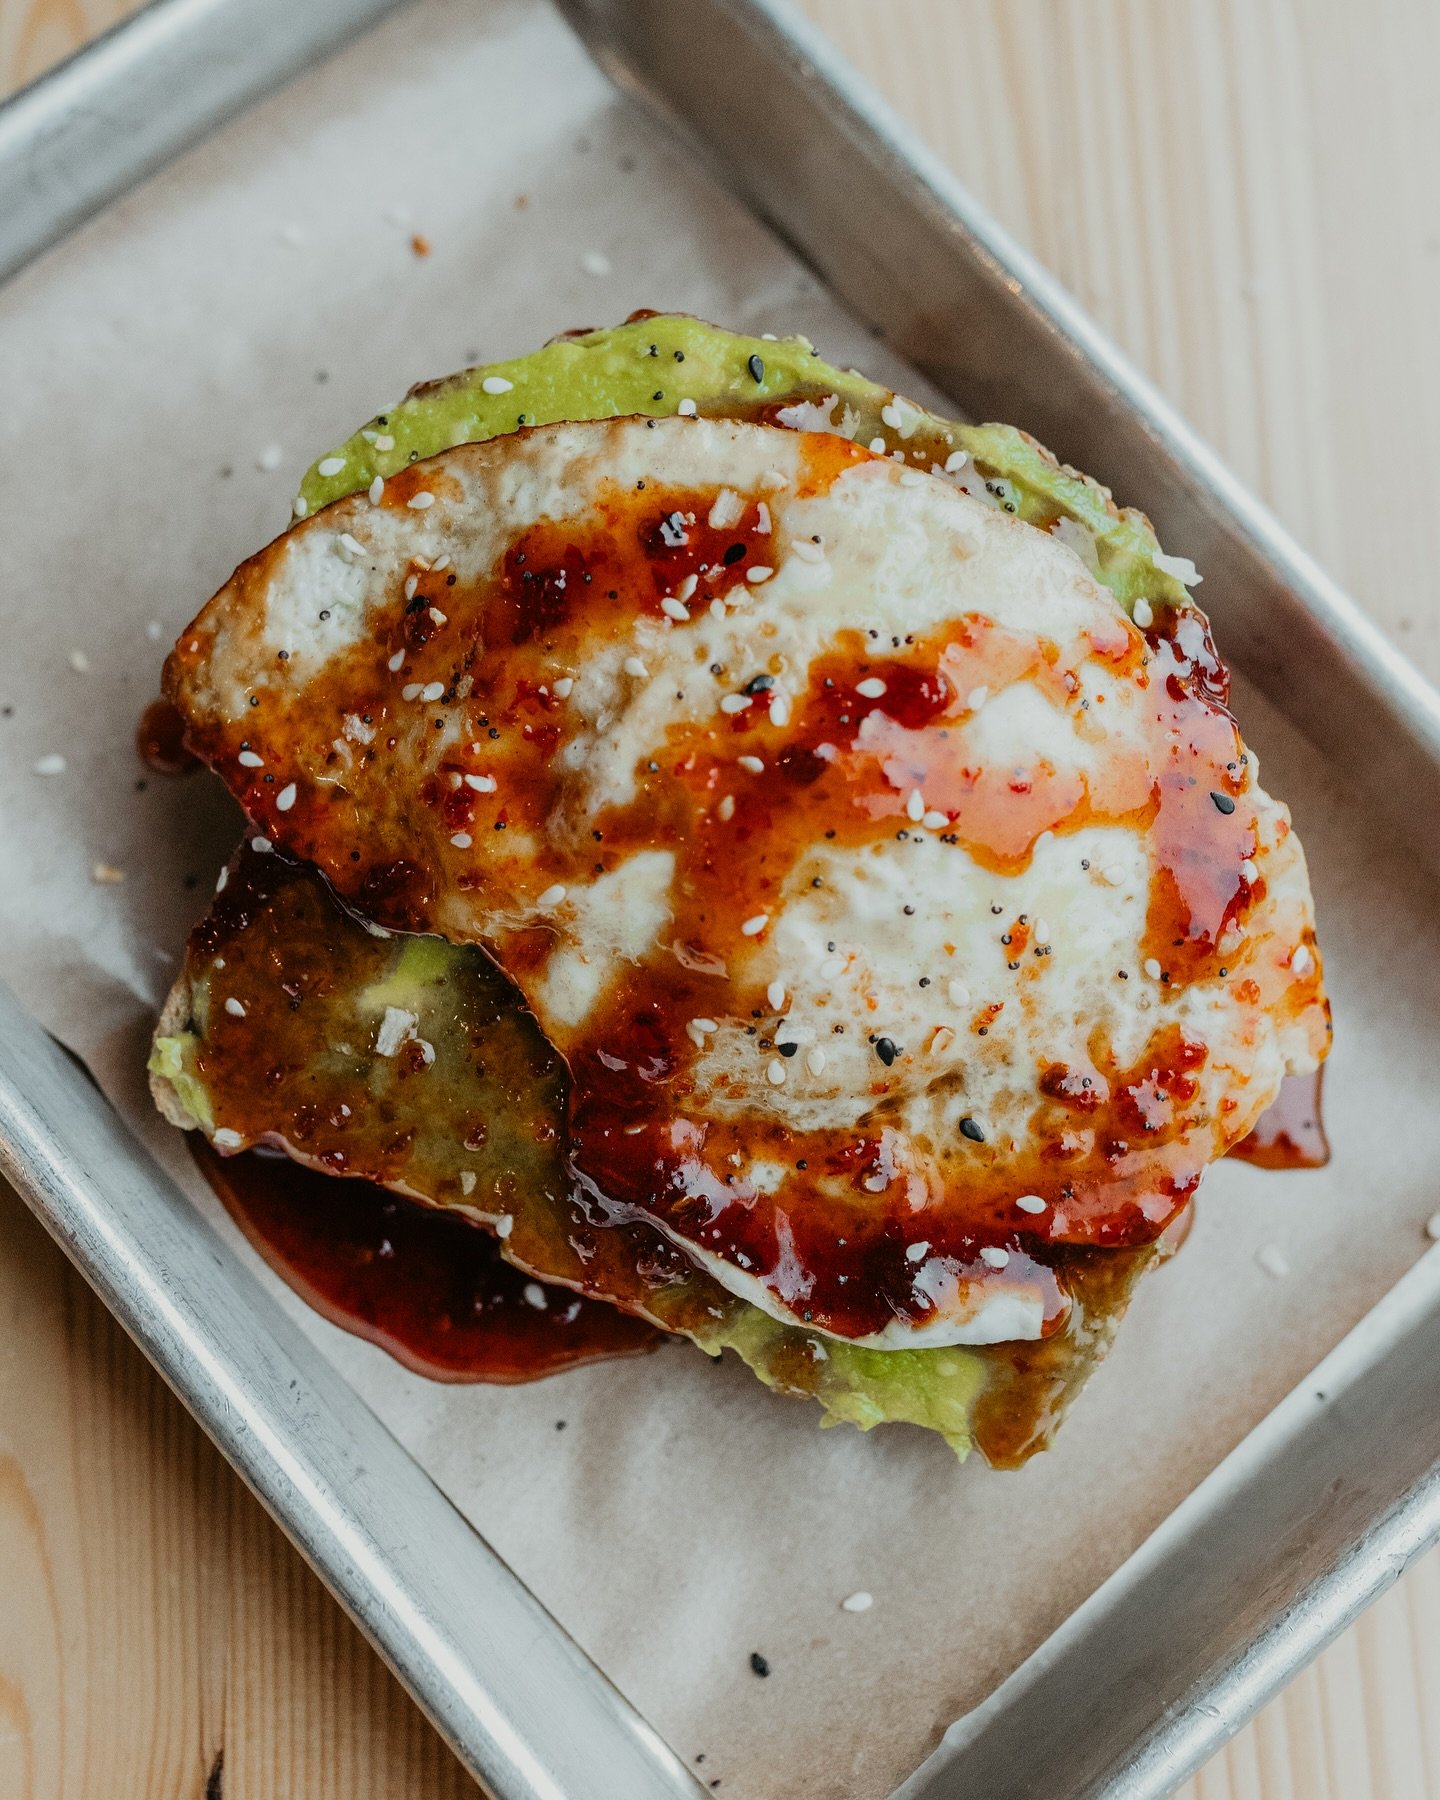 Hitting the food menu today is the Sizzlin&rsquo; Avocado toast! 🔥🥑
&nbsp; ⠀⠀⠀⠀⠀⠀⠀⠀⠀⠀⠀
We start with our world-famous house-made avocado spread and add on everything seasoning, a fried egg and a one-off hot honey. 
&nbsp; ⠀⠀⠀⠀⠀⠀⠀⠀⠀⠀⠀
Come by the sh